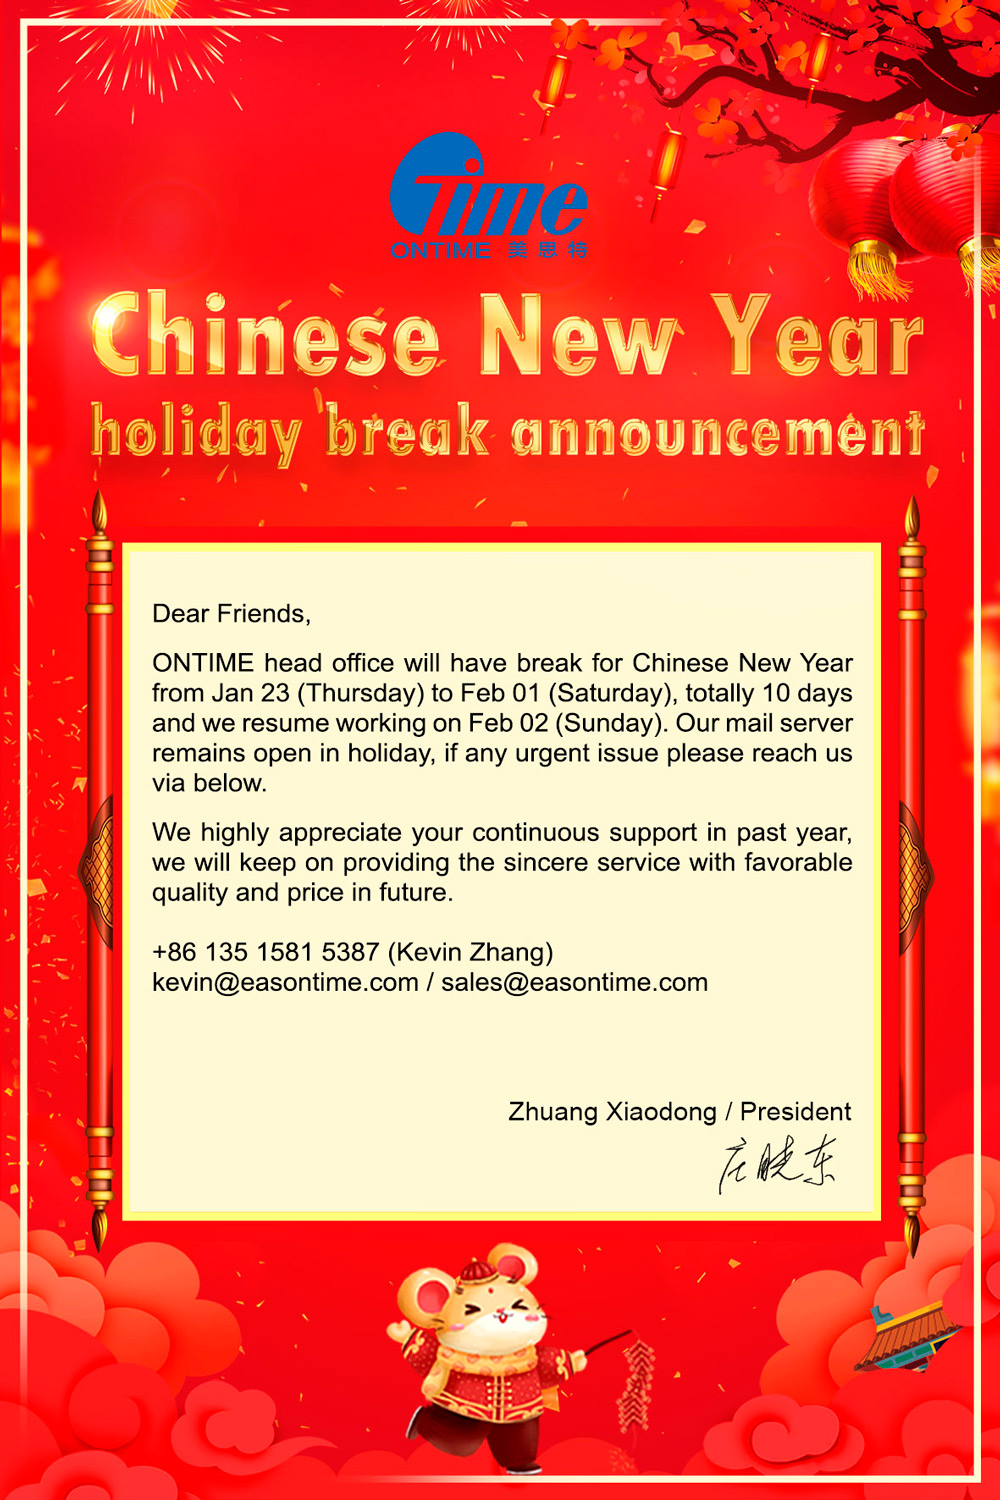 Chinese New Year holiday break announcement